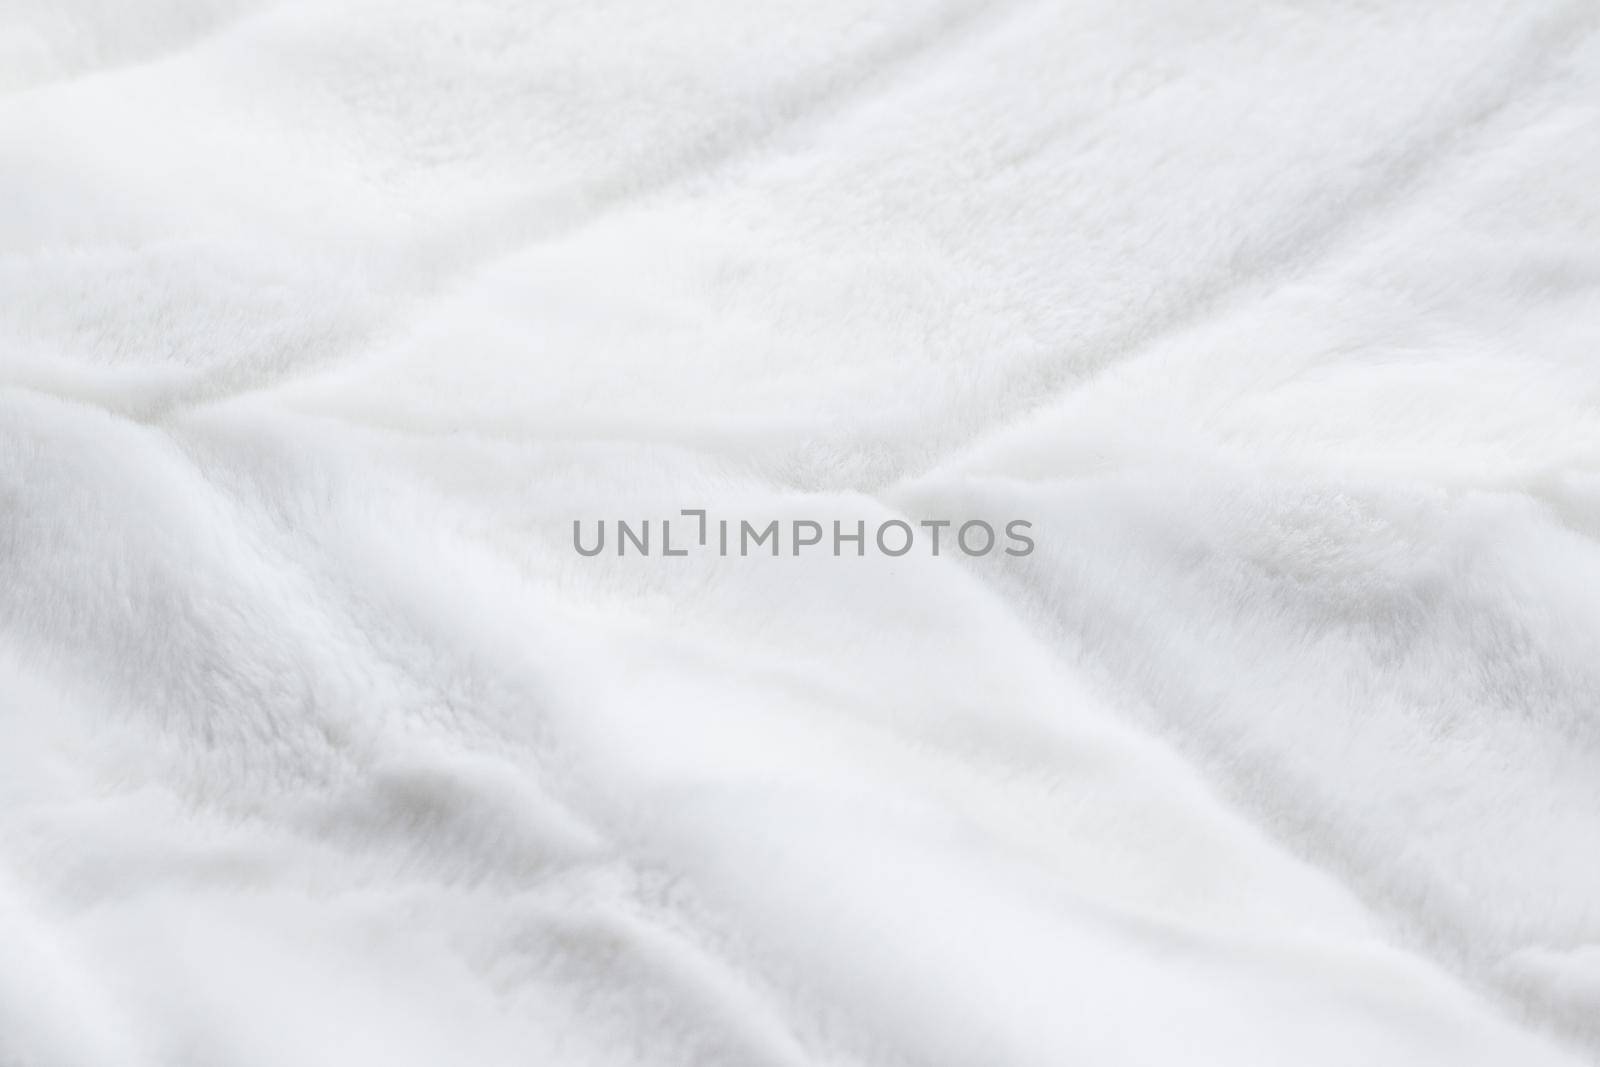 Fashion design, warm winter clothing and vintage material concept - Luxury white fur coat texture background, artificial fabric detail